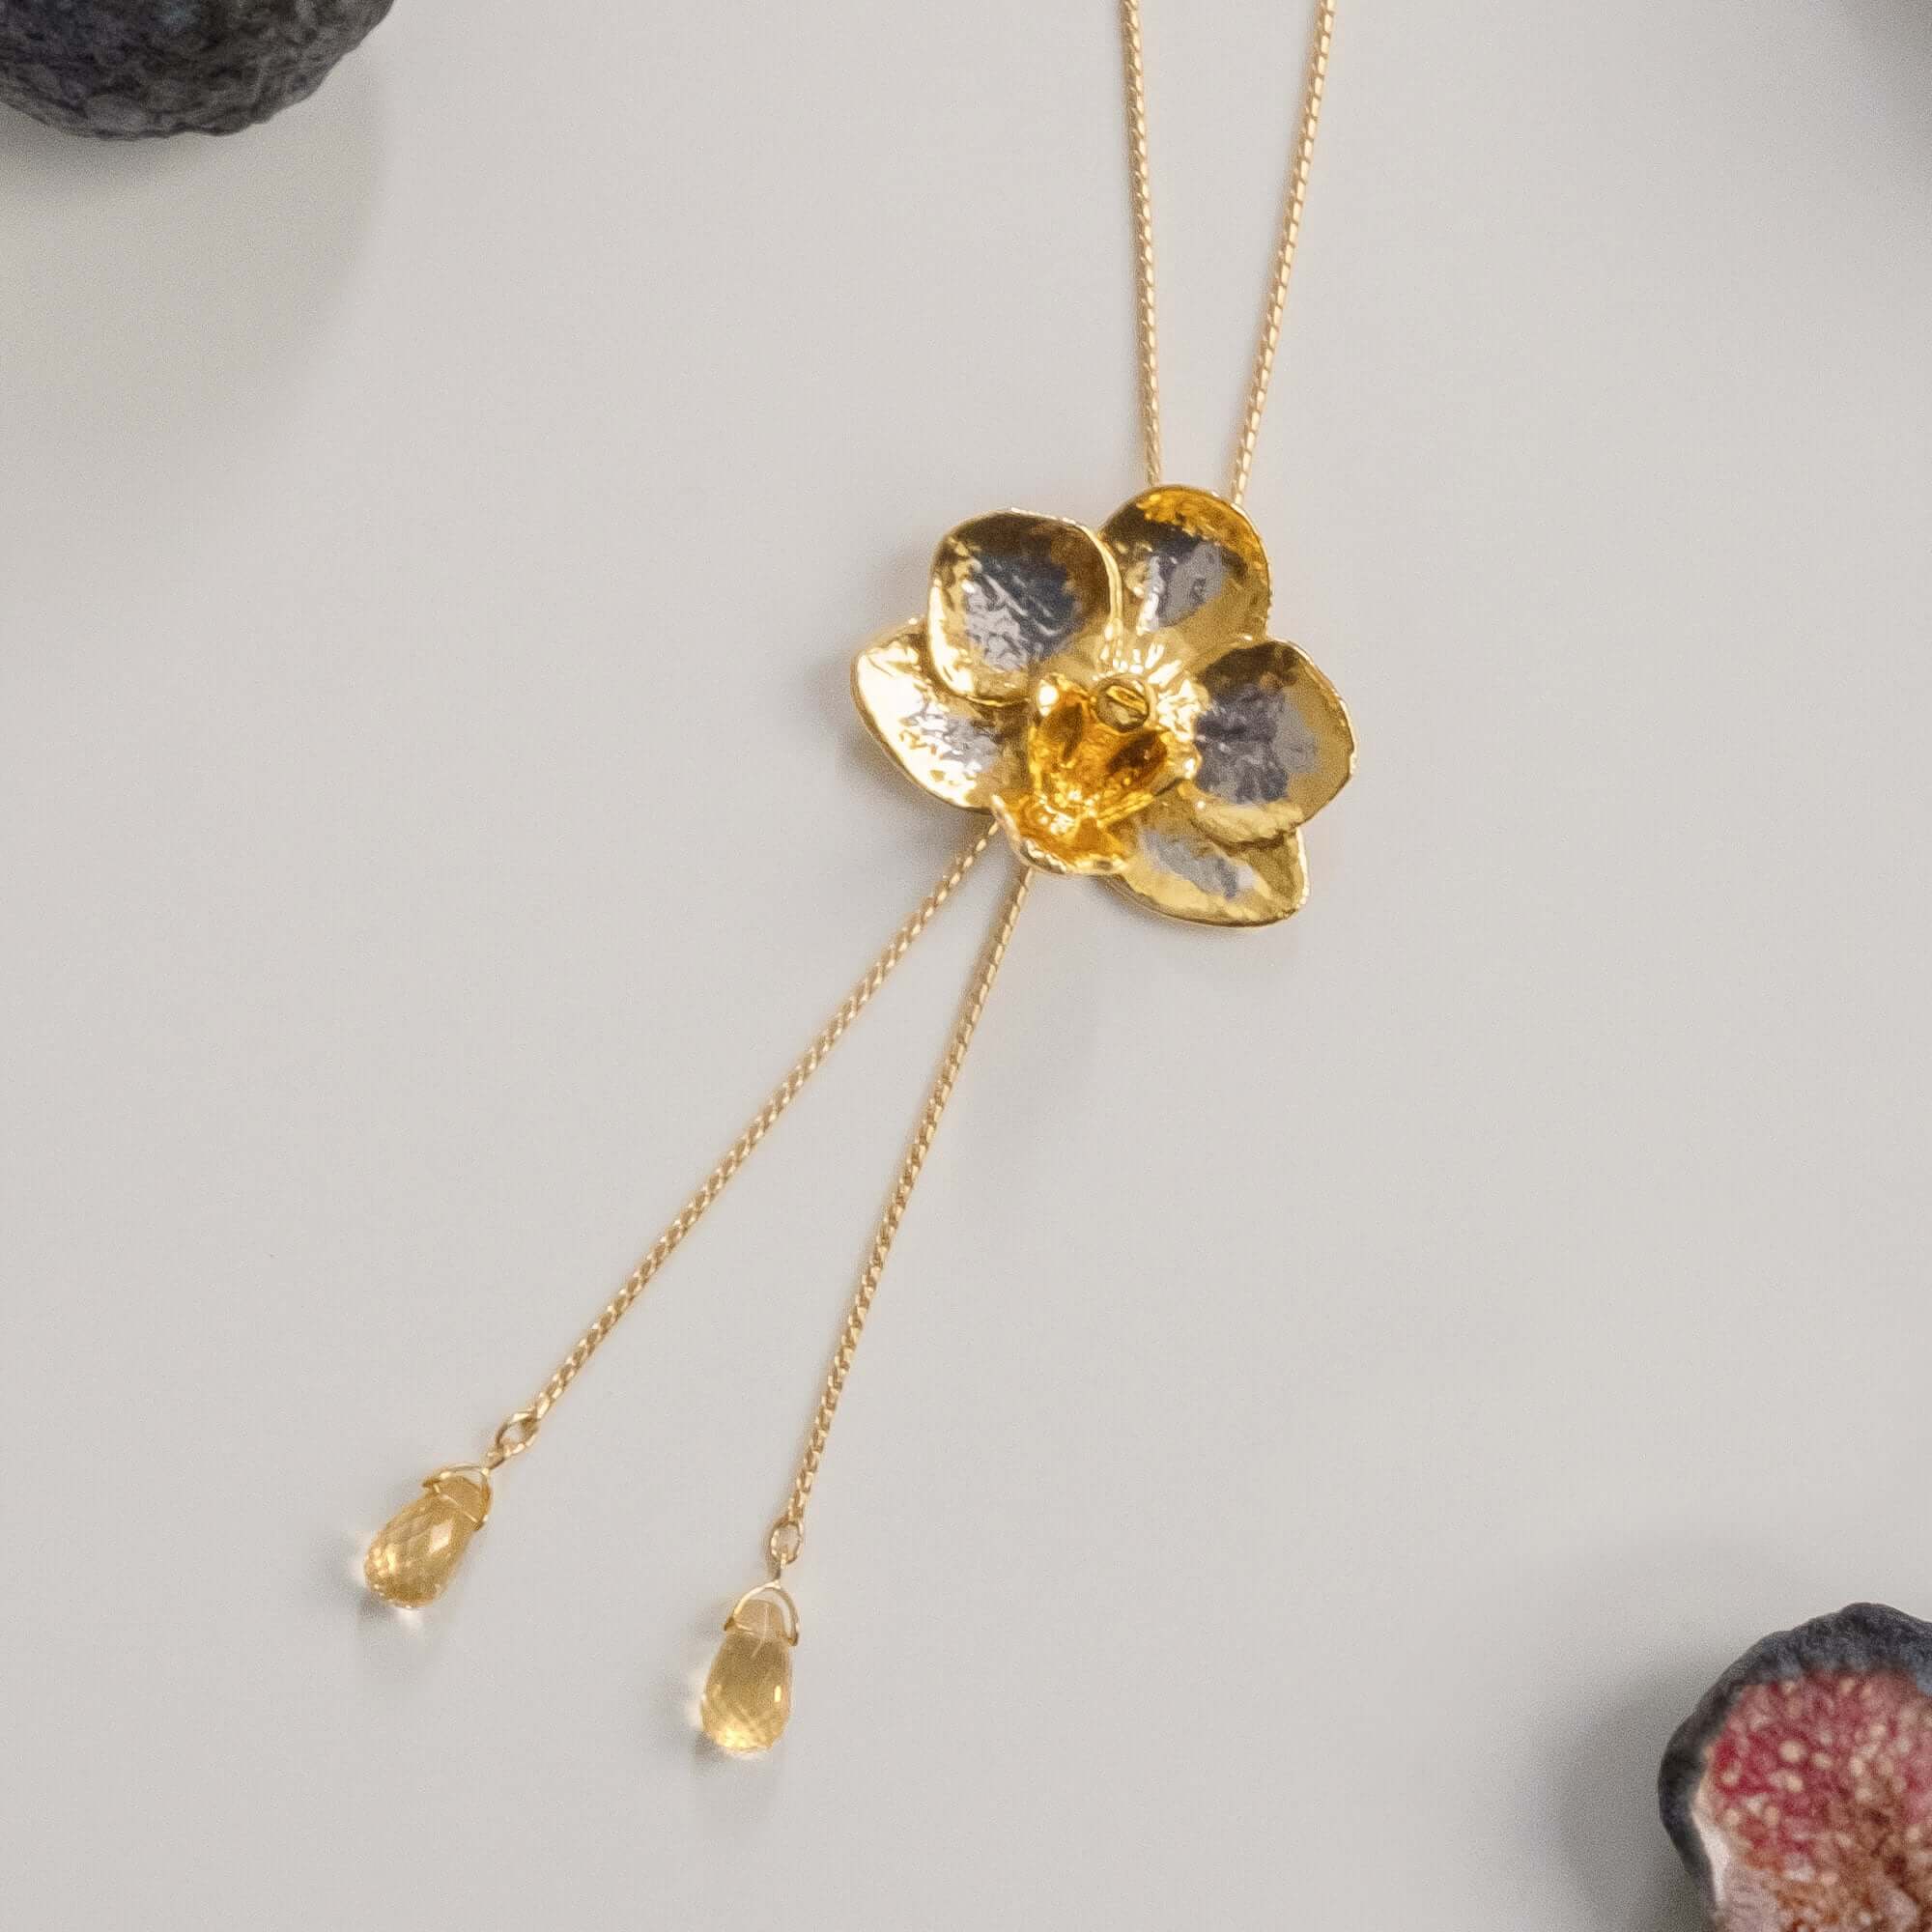 Yenlin Orchid Slider Necklace with Citrine